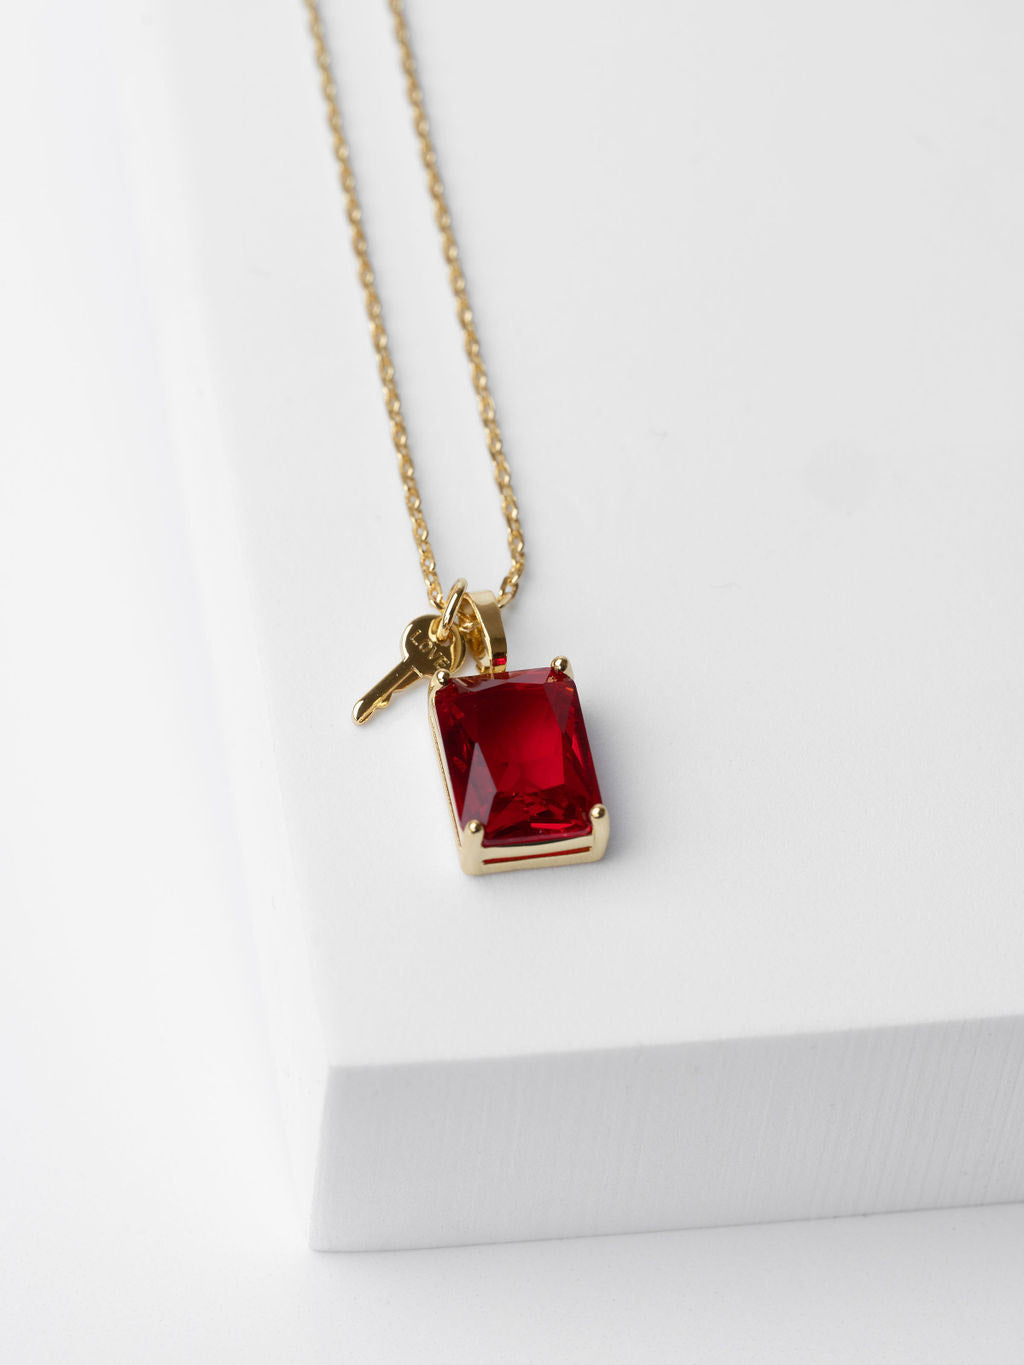 Emerald Cut Gemstone and Mini Key Necklace Necklaces The Giving Keys LOVE / Ruby 